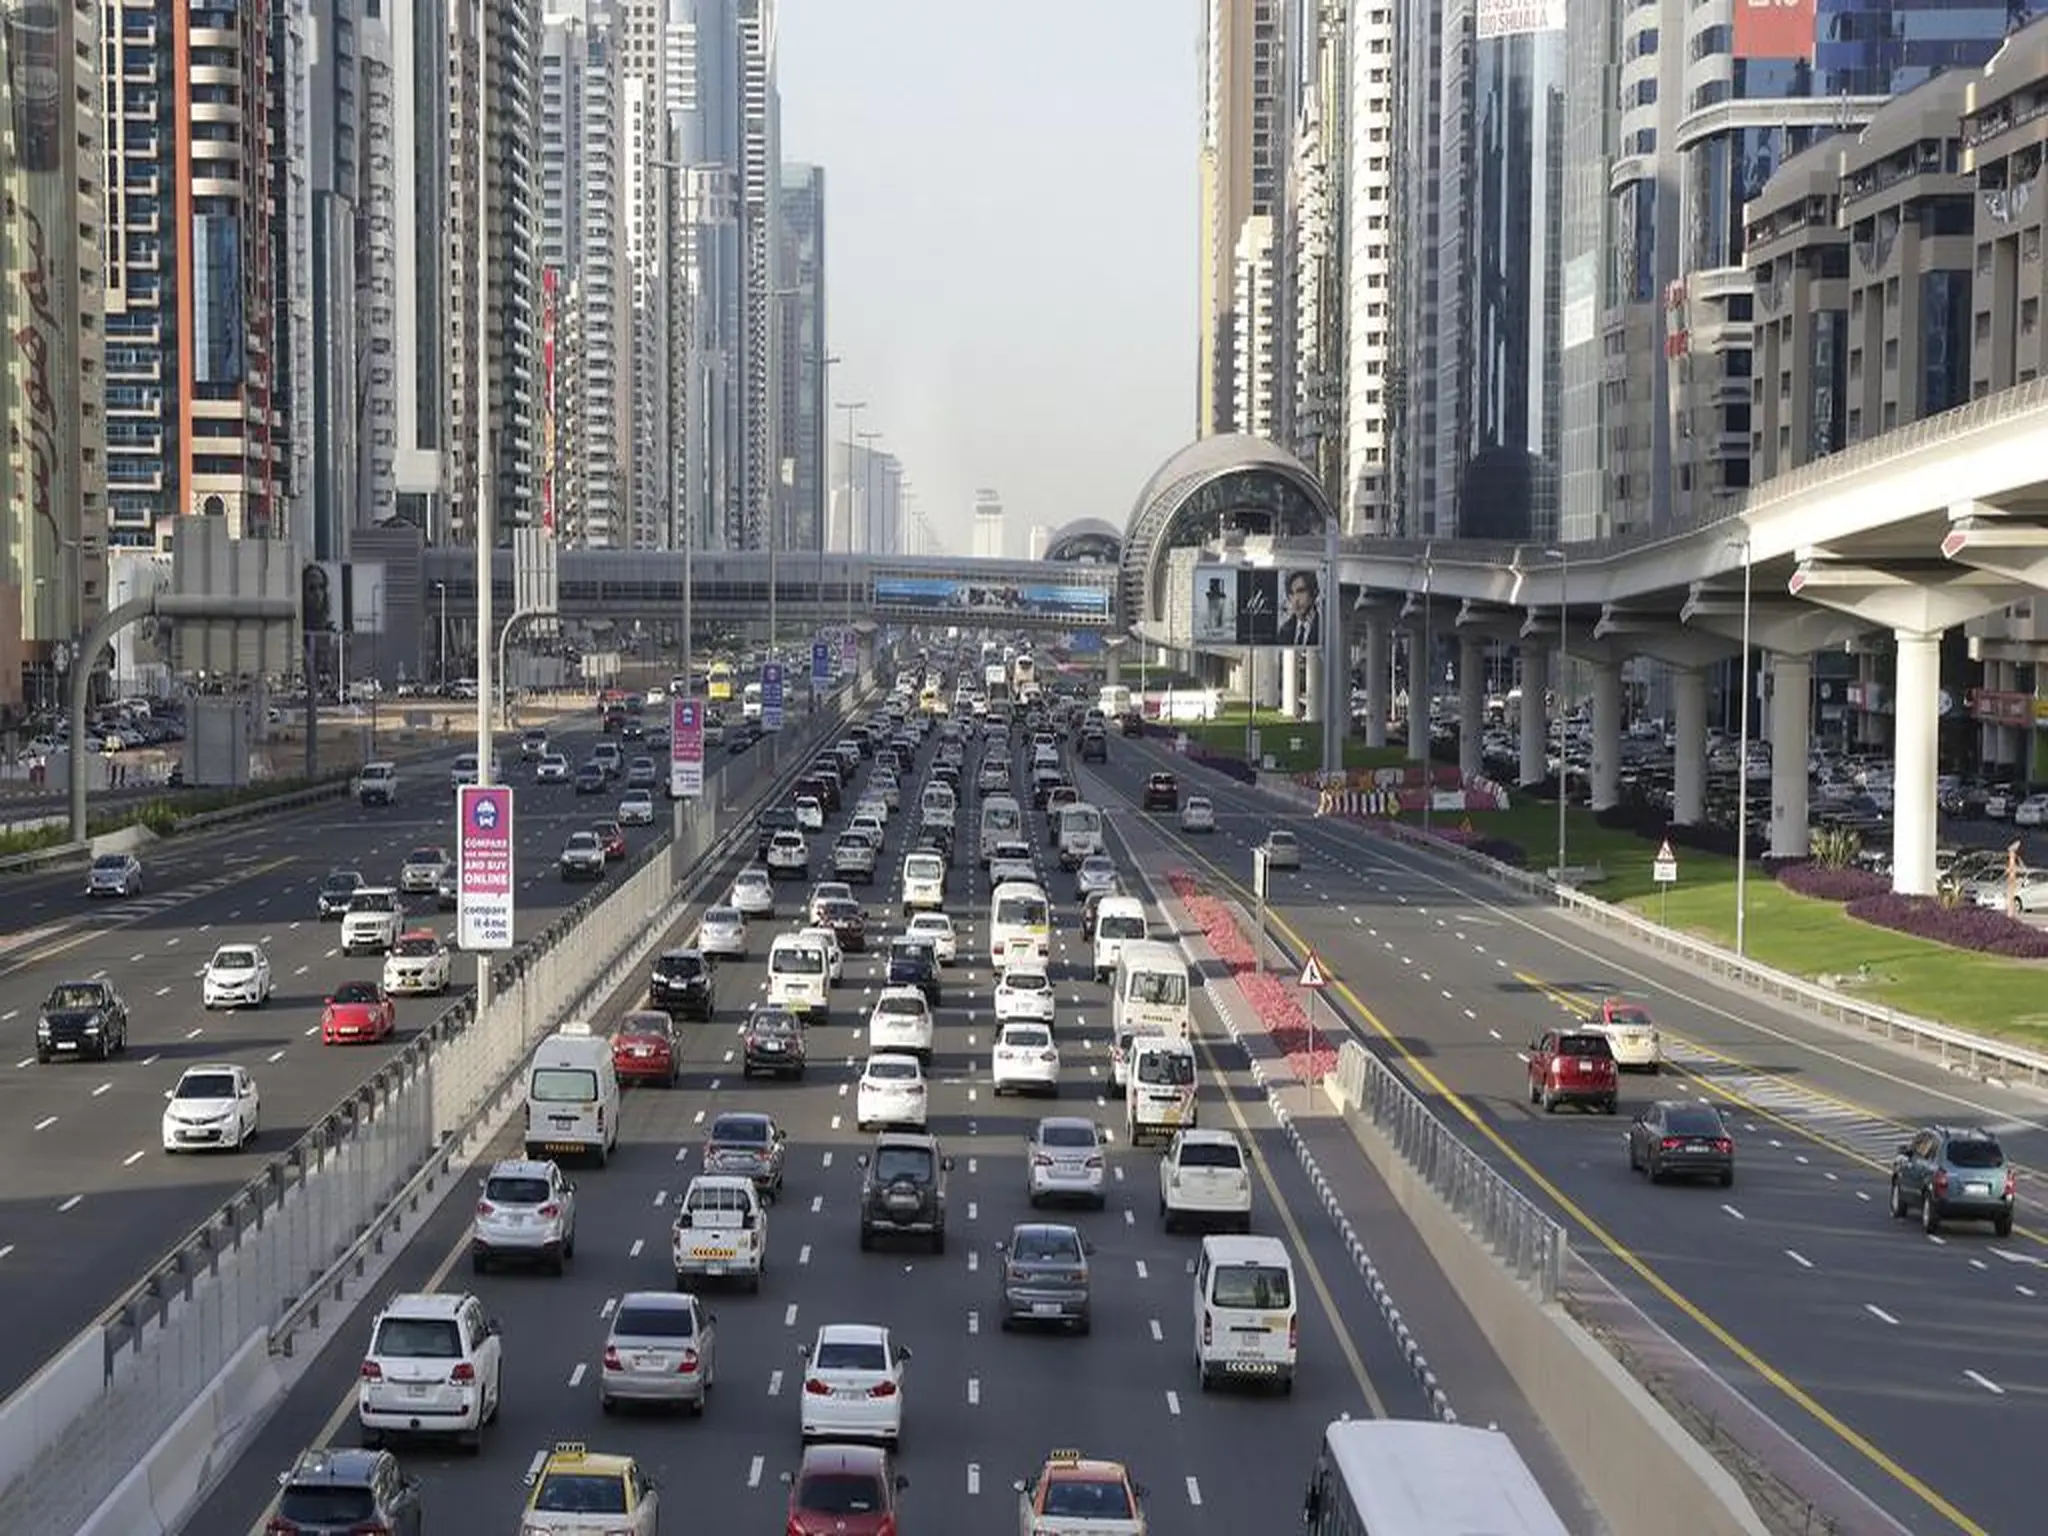 In how many countries can one use a dubai driver's license?